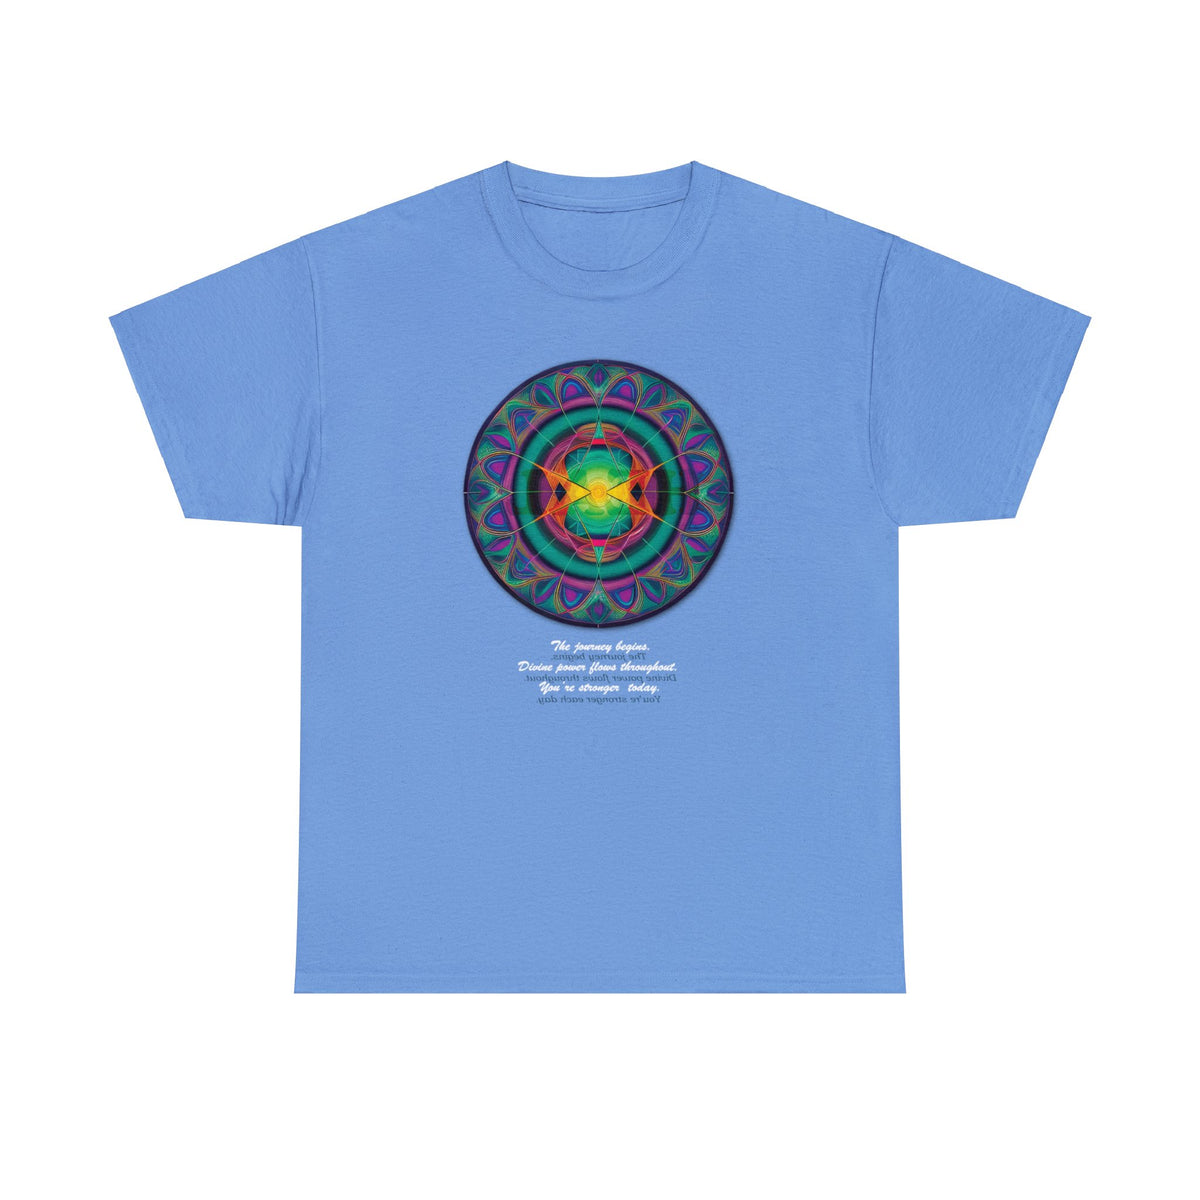 Wellness Shirts - Heal with positivity and mindfulness